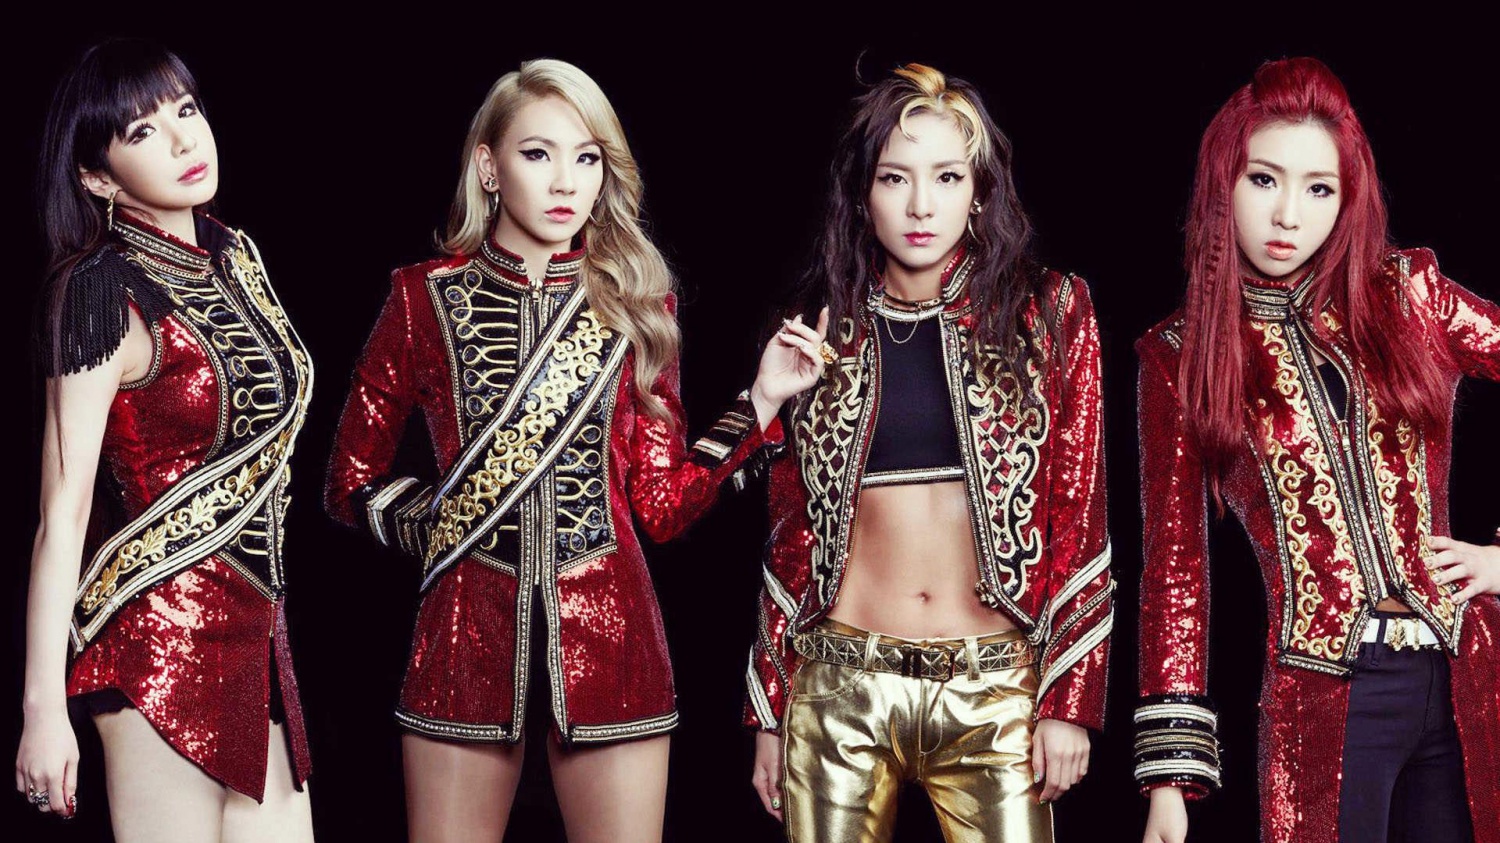 Is 2ne1 Returning To The Music Scene In May 21 Park Bom Dara And Minzy Hinted At Possible Reunion Kpopstarz